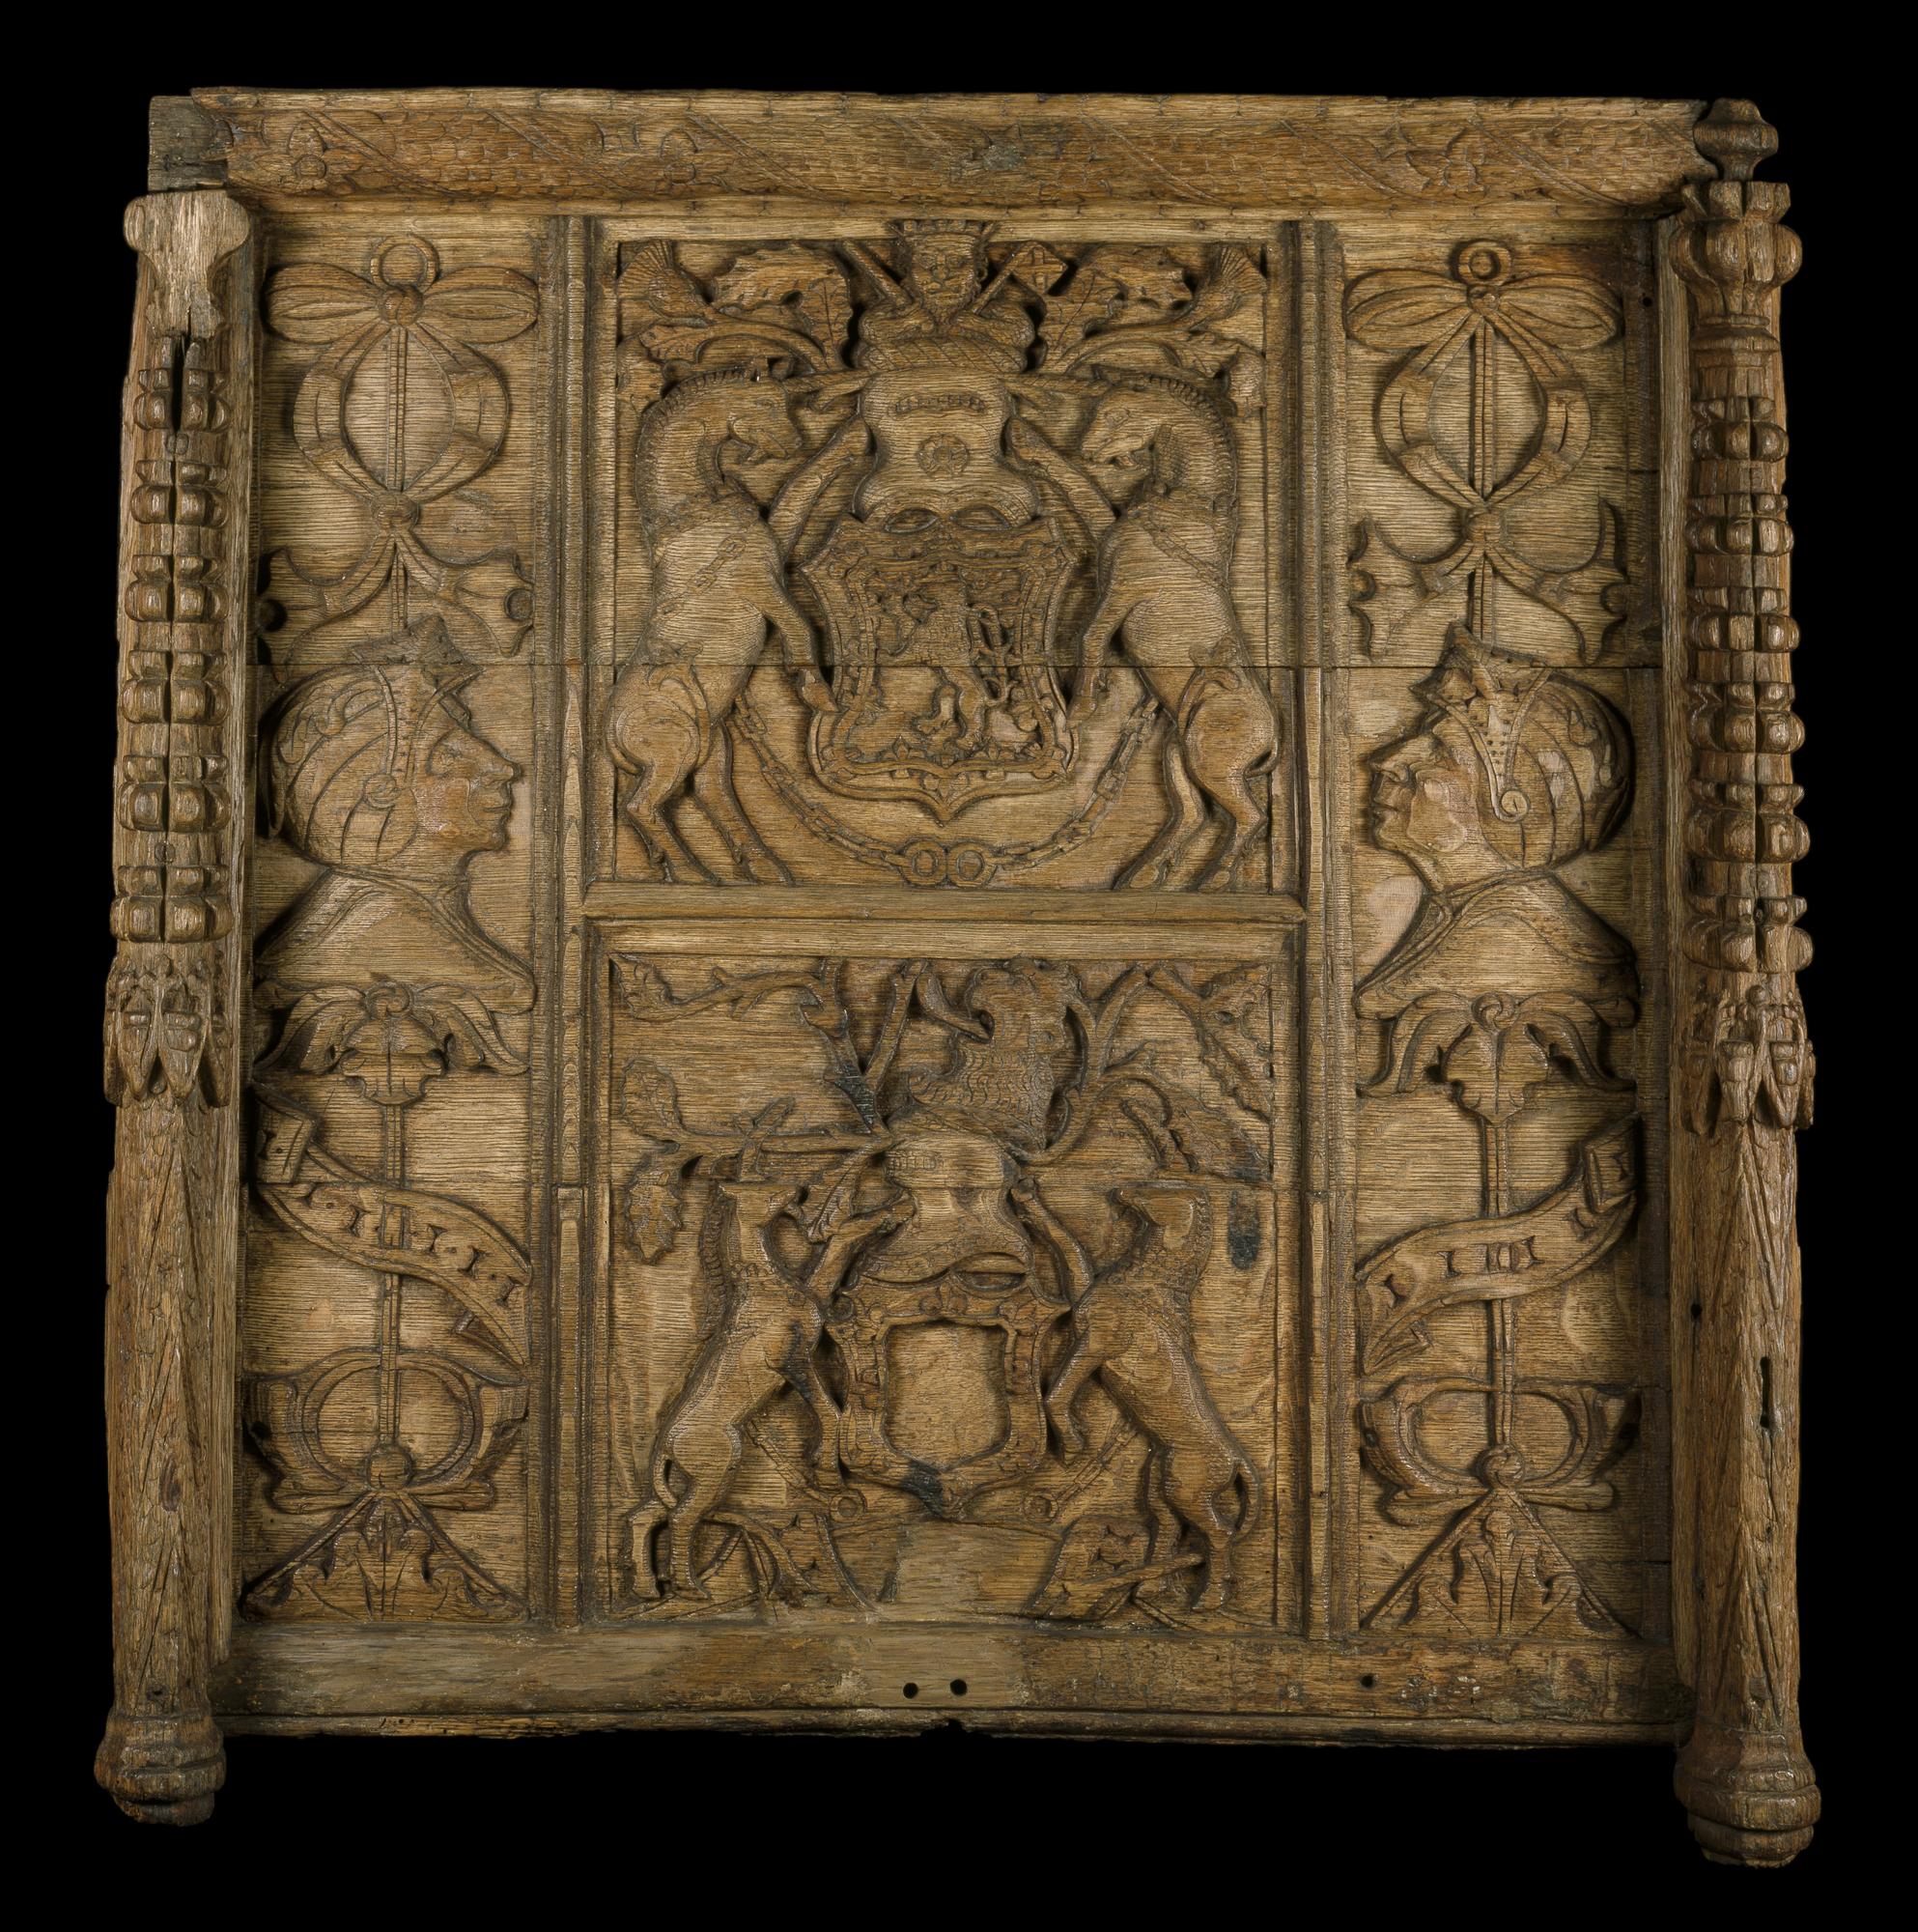 Wooden panel with the royal arms of Scotland, from Linlithgow Palace, 1540 - 1570.